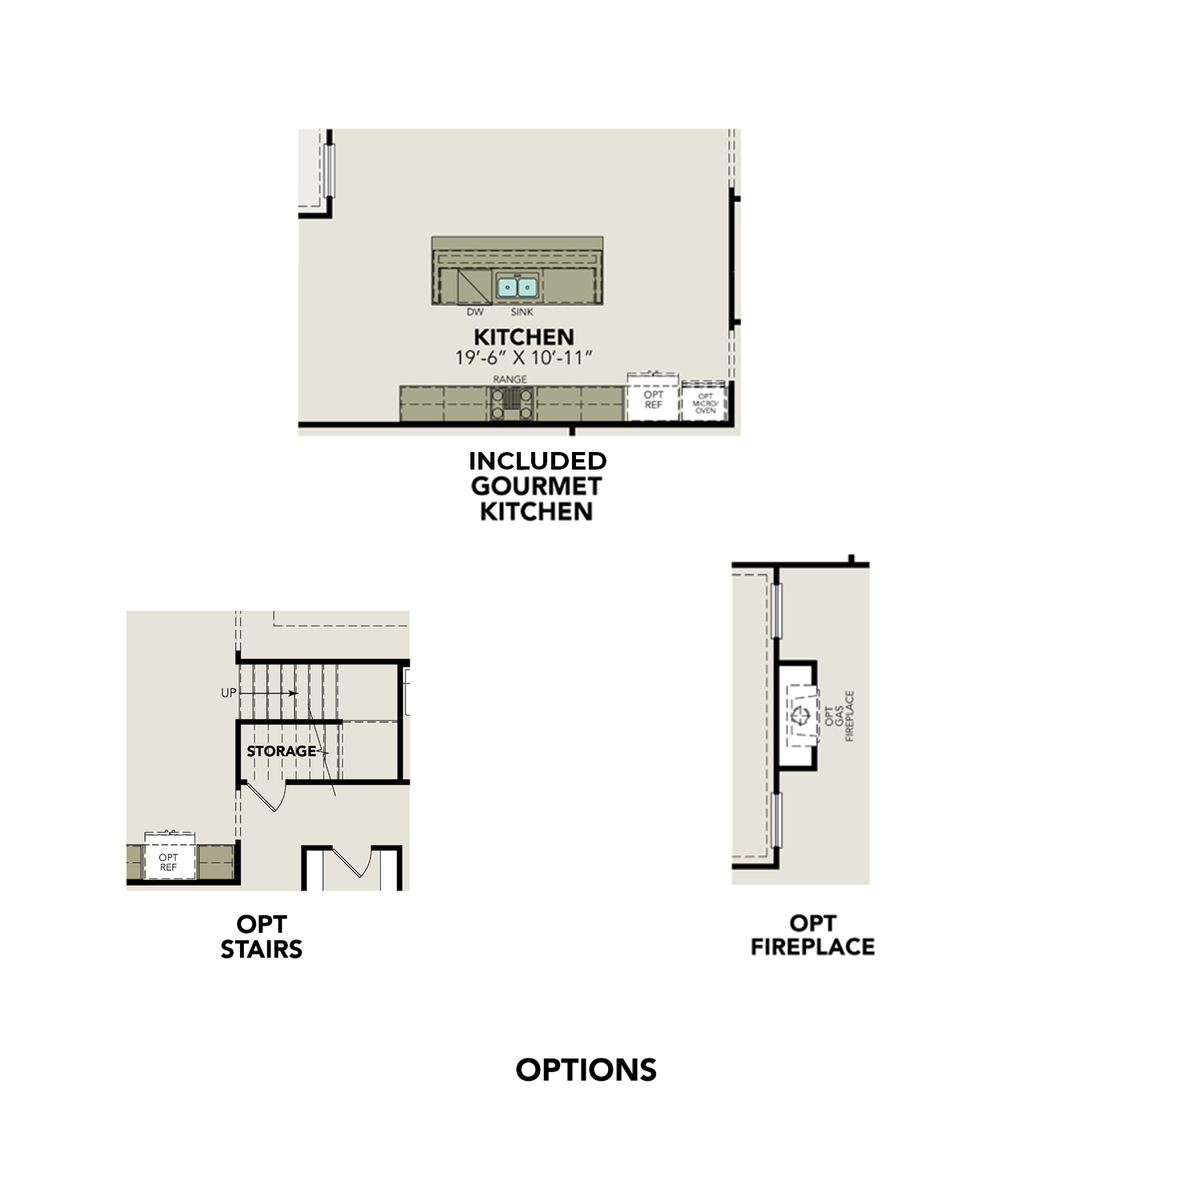 3 - The Foster D floor plan layout for 147 Matthew Path in Davidson Homes' Potranco Oaks community.